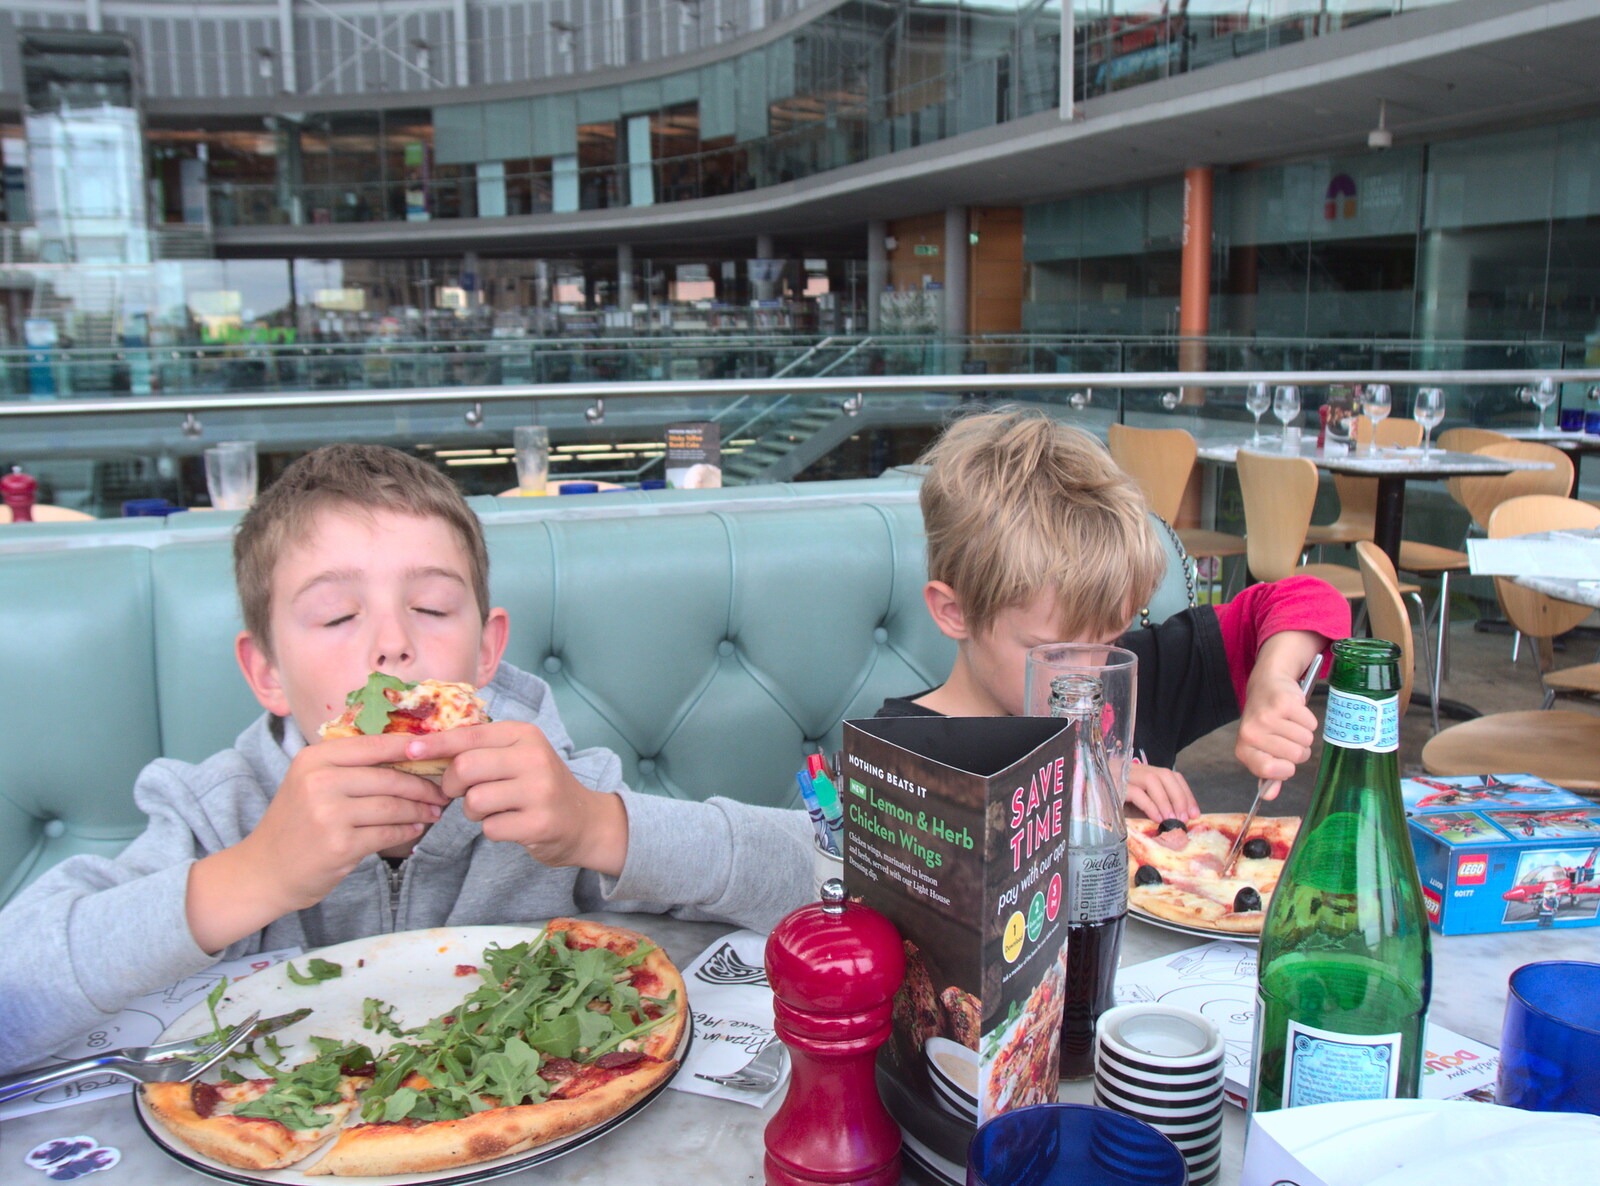 Fred's in heaven as we eat pizza at Pizza Express from A Miscellany, Norwich , Norfolk - 30th September 2018